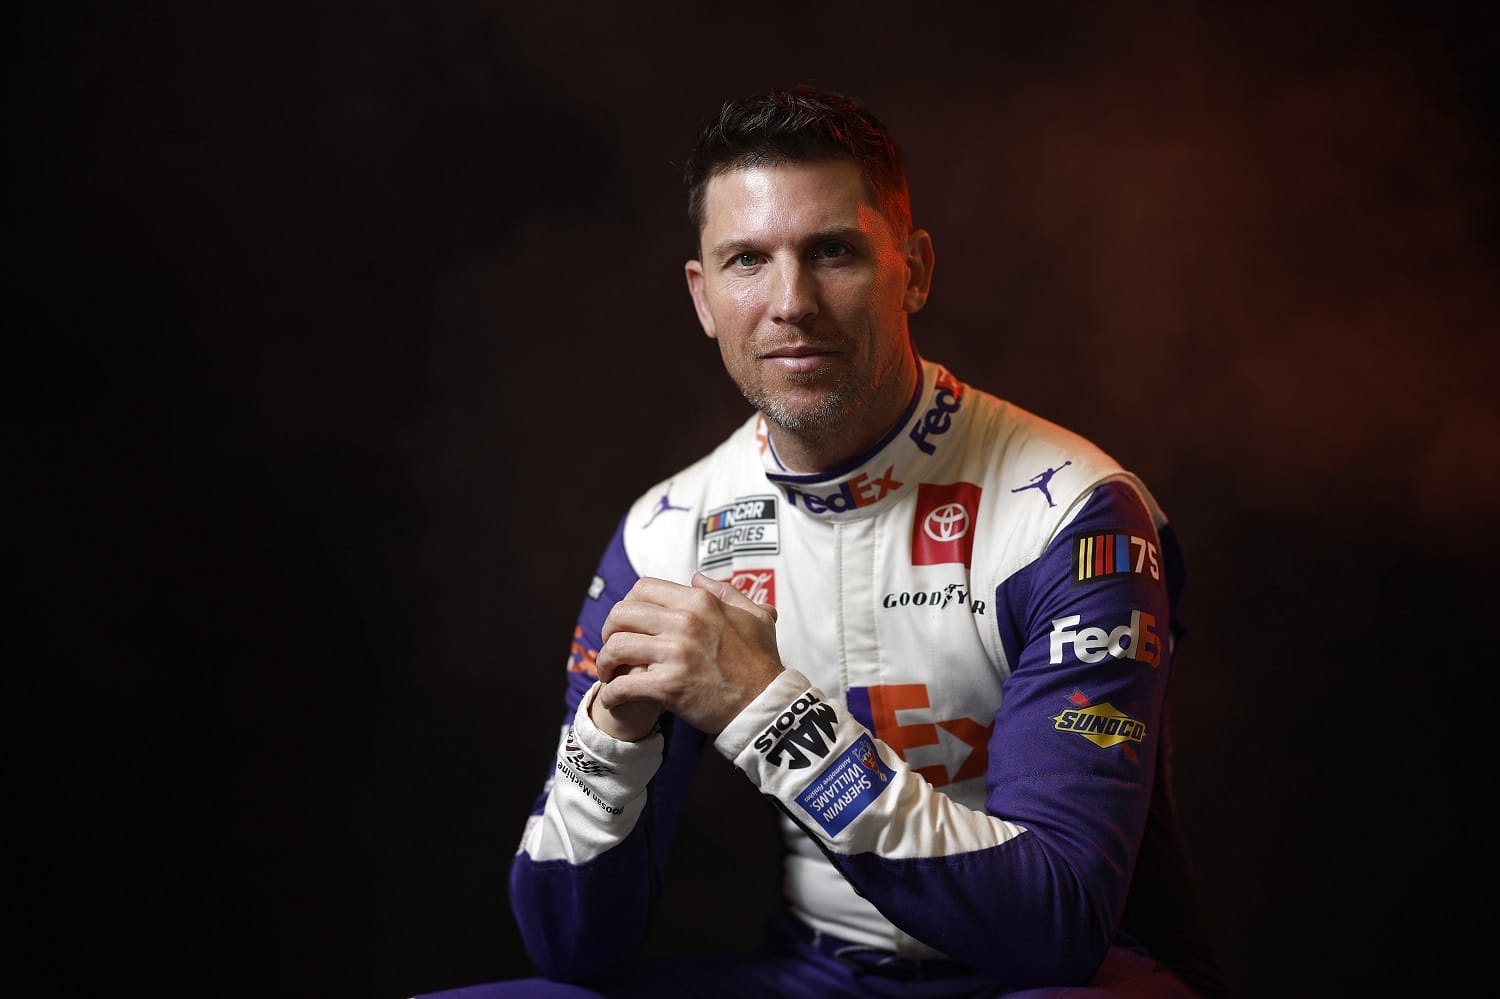 Denny Hamlin poses for a photo during NASCAR Production Days at Charlotte Convention Center on Jan. 18, 2023.